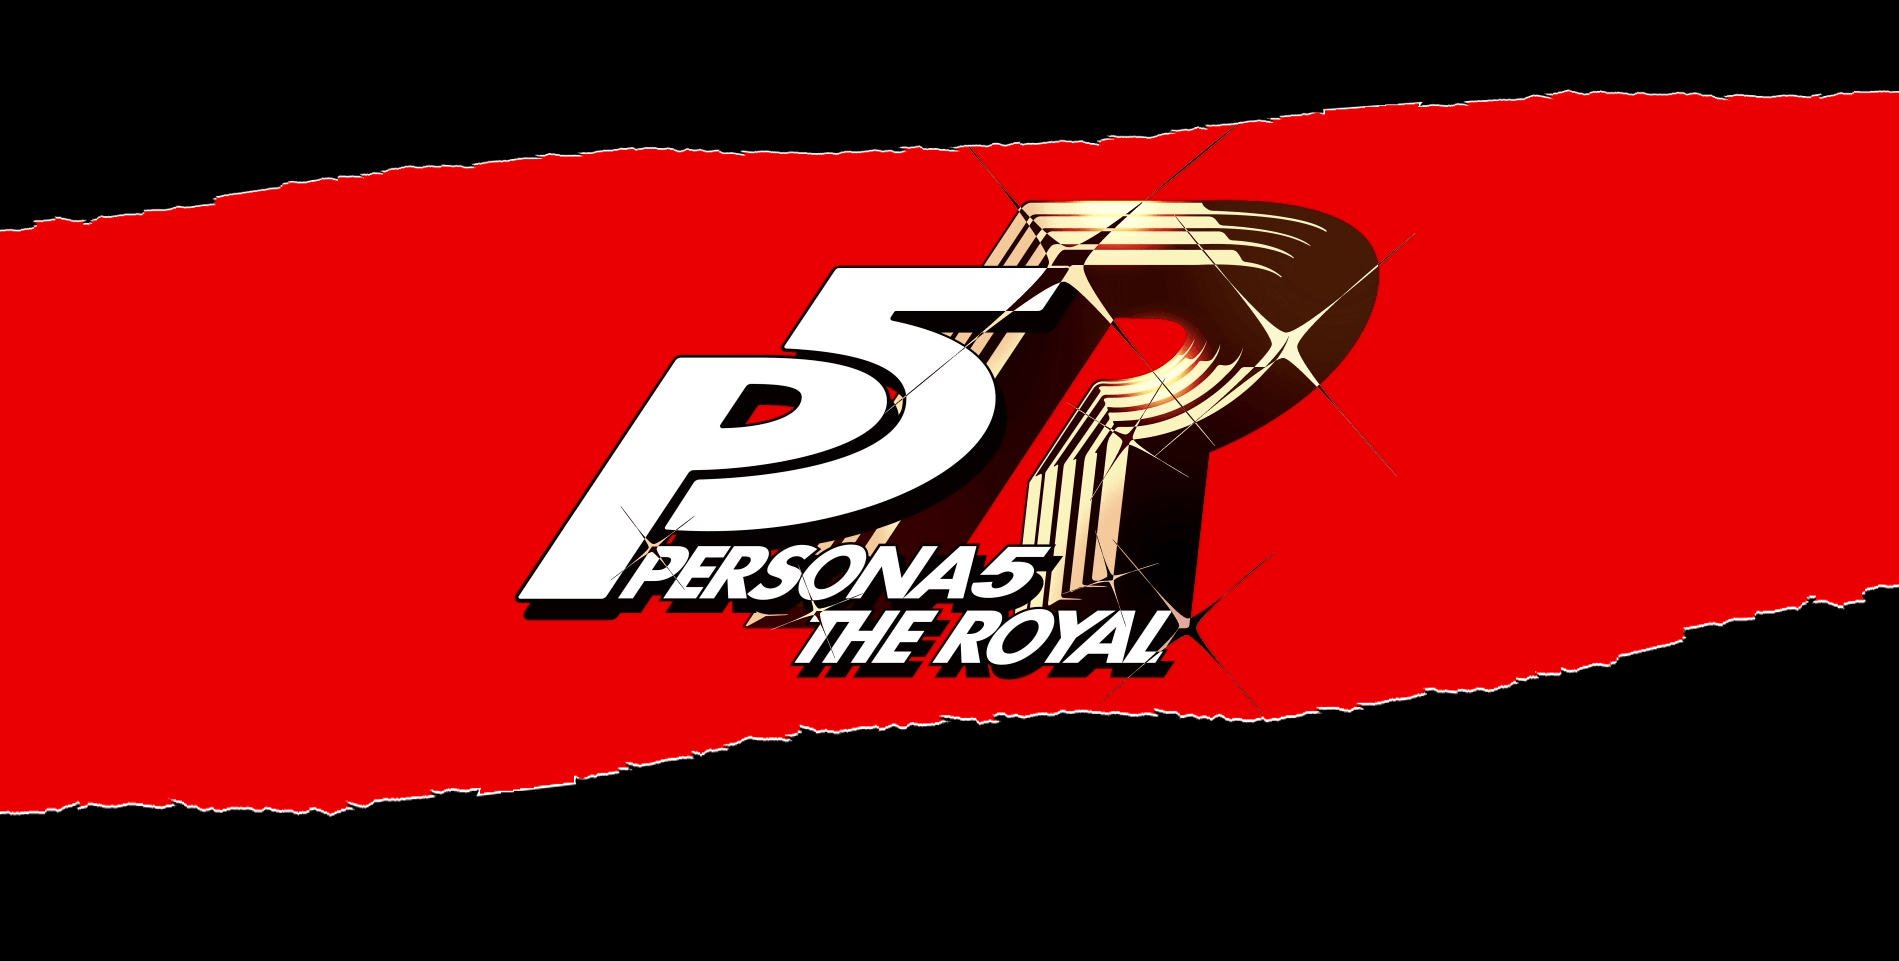 So I made a Persona 5 The Royal wallpaper Well it's more I